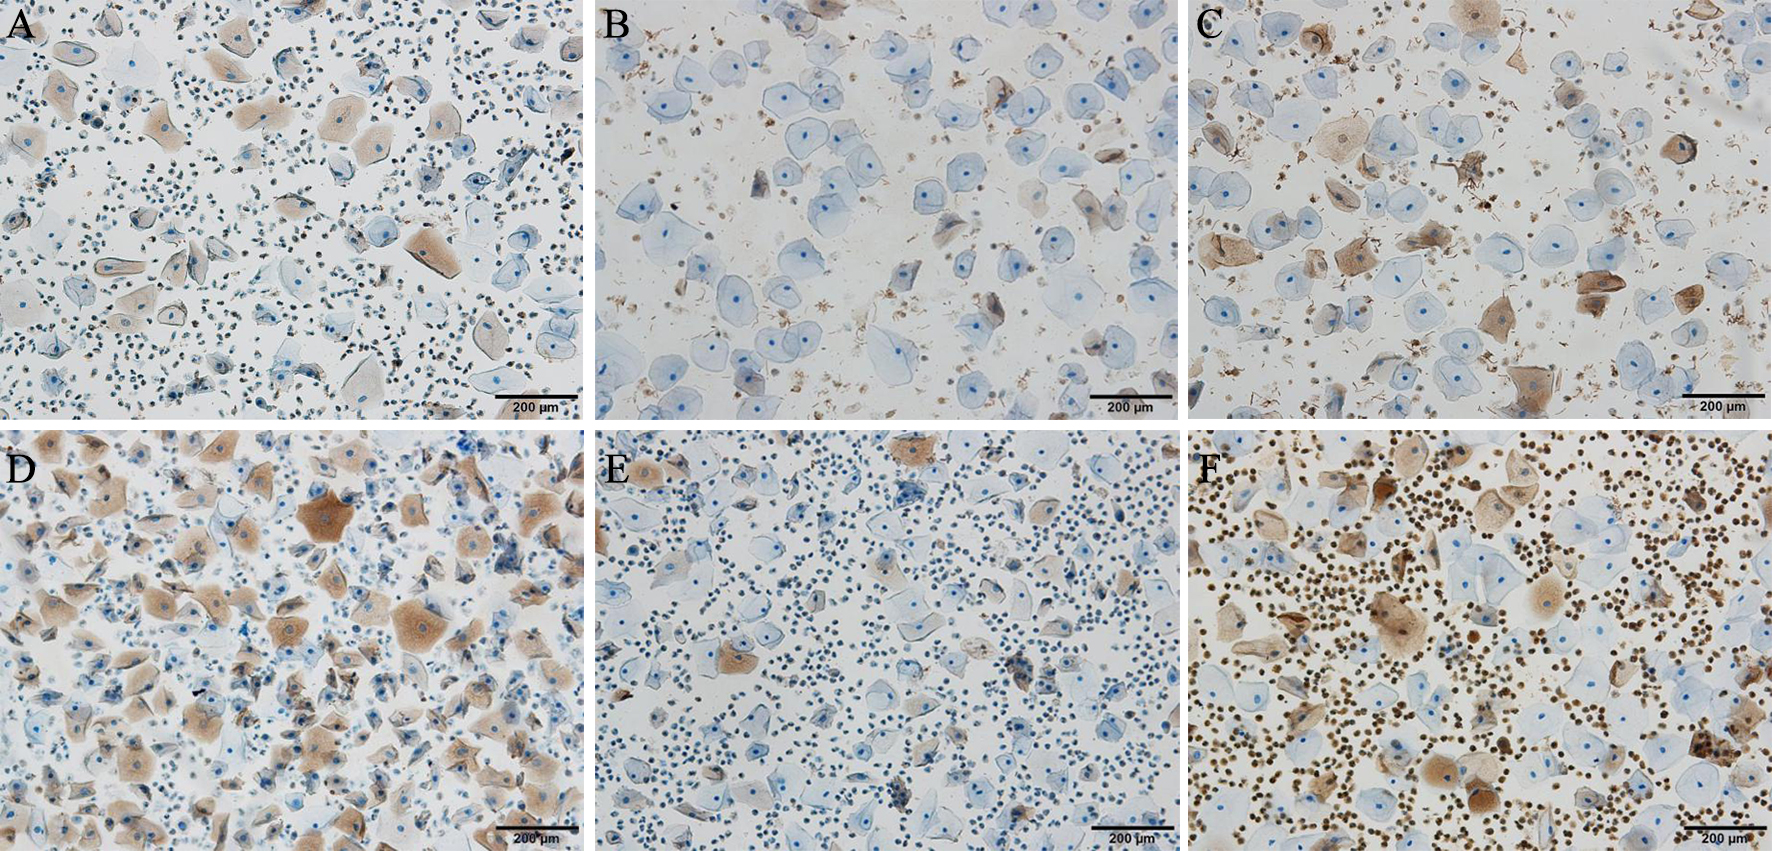 Representative images of ICC in cervical exfoliated cells obtained from normal women and patients with cervical intraepithelial neoplasia (CIN). (A) FHIT expression in exfoliated cells obtained from normal tissue. (B) FHIT expression in exfoliated cells obtained from CIN1 tissue. (C) FHIT expression in exfoliated cells obtained from CIN3 tissue. (D) C-MYC expression in exfoliated cells obtained from normal tissue. (E) C-MYC expression in exfoliated cells obtained from CIN1 tissue. (F) C-MYC expression in exfoliated cells obtained from CIN3 tissue. Original magnification × 400.